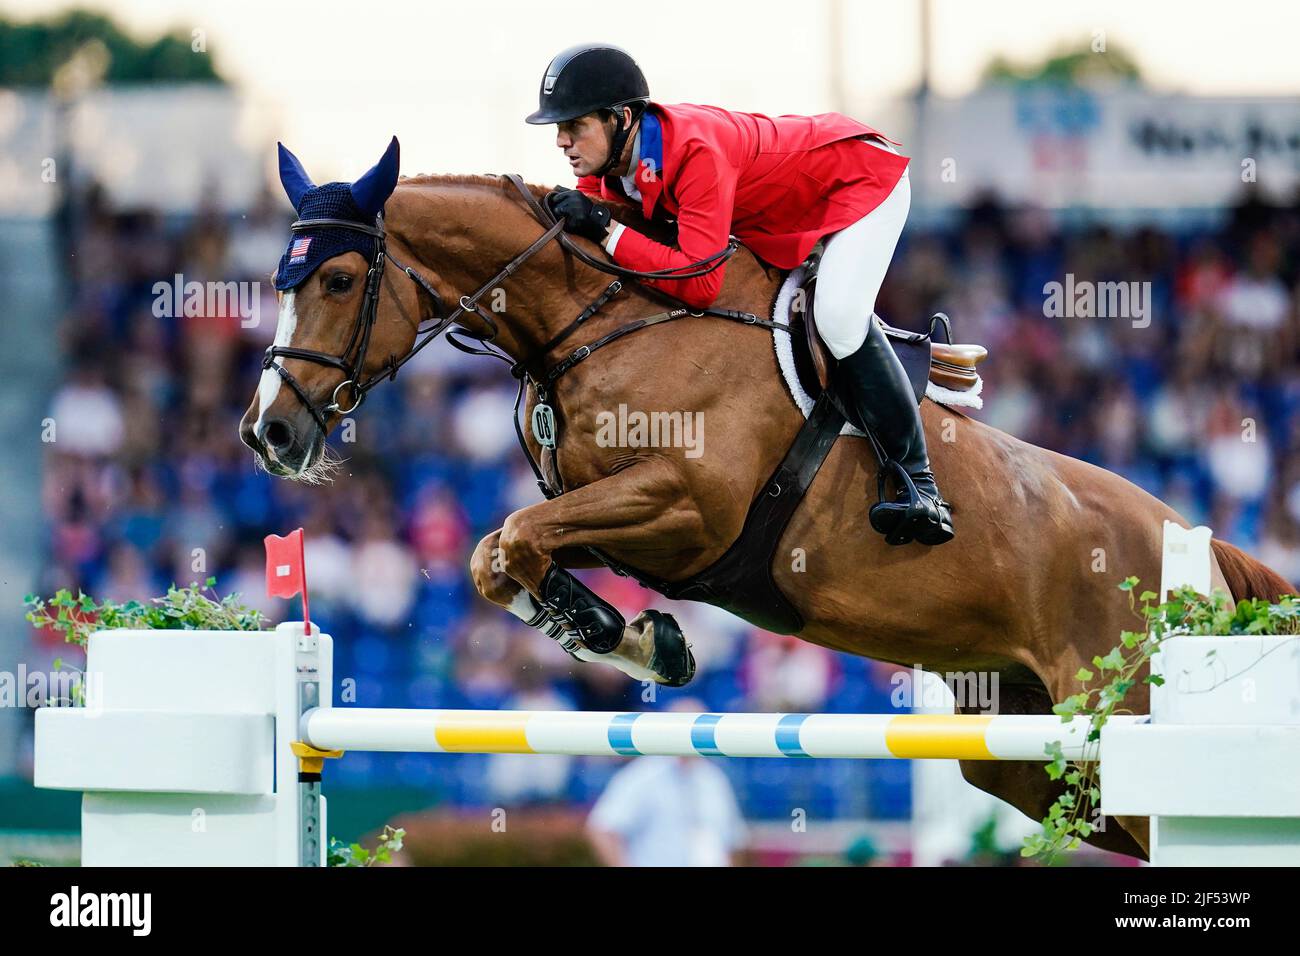 horse jumping live